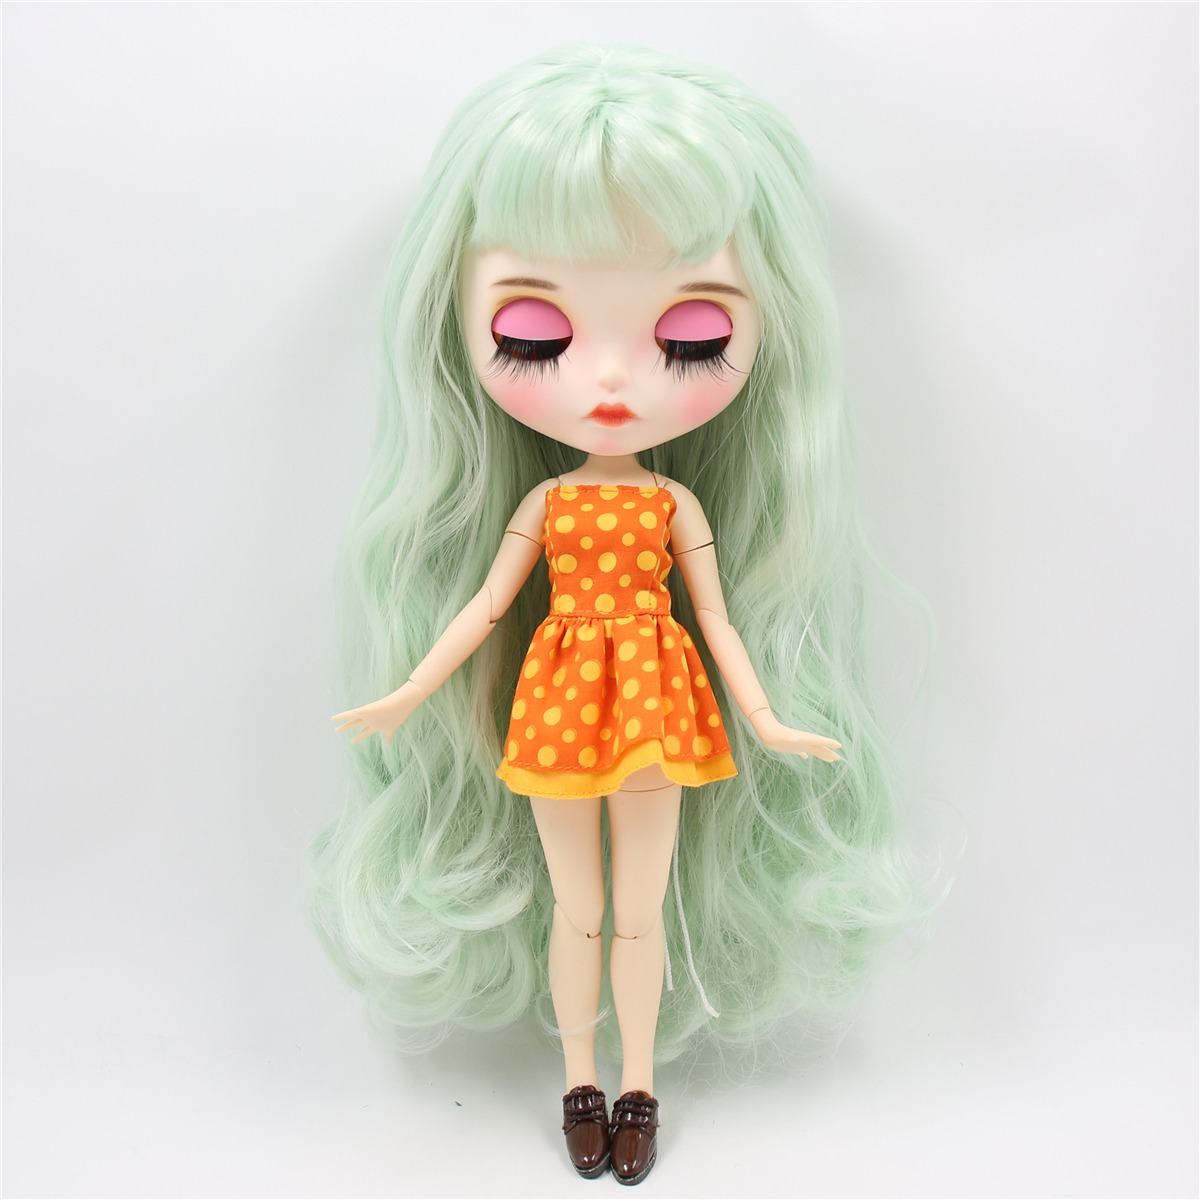 Sophie – Premium Custom Neo Blythe Doll with Green Hair, White Skin & Matte Pouty Face Best-selling custom Blythe dolls Green hair custom Blythe doll Matte face custom Blythe doll White skin custom Blythe doll